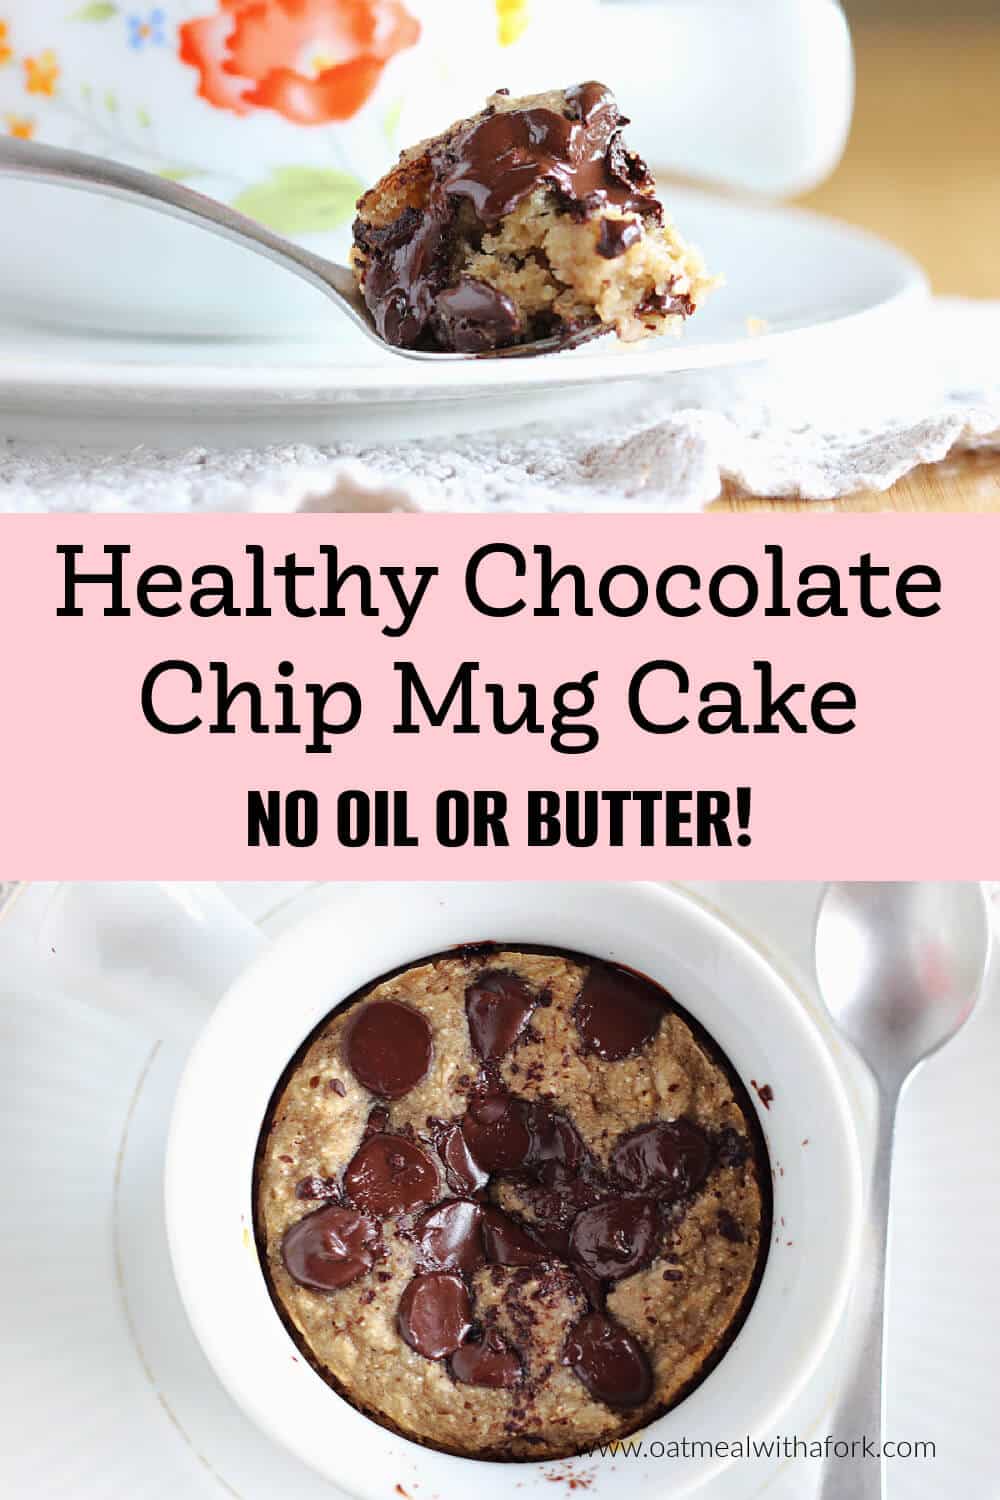 Healthy Chocolate Chip Mug Cake (No Oil or Butter!) - Oatmeal with a Fork